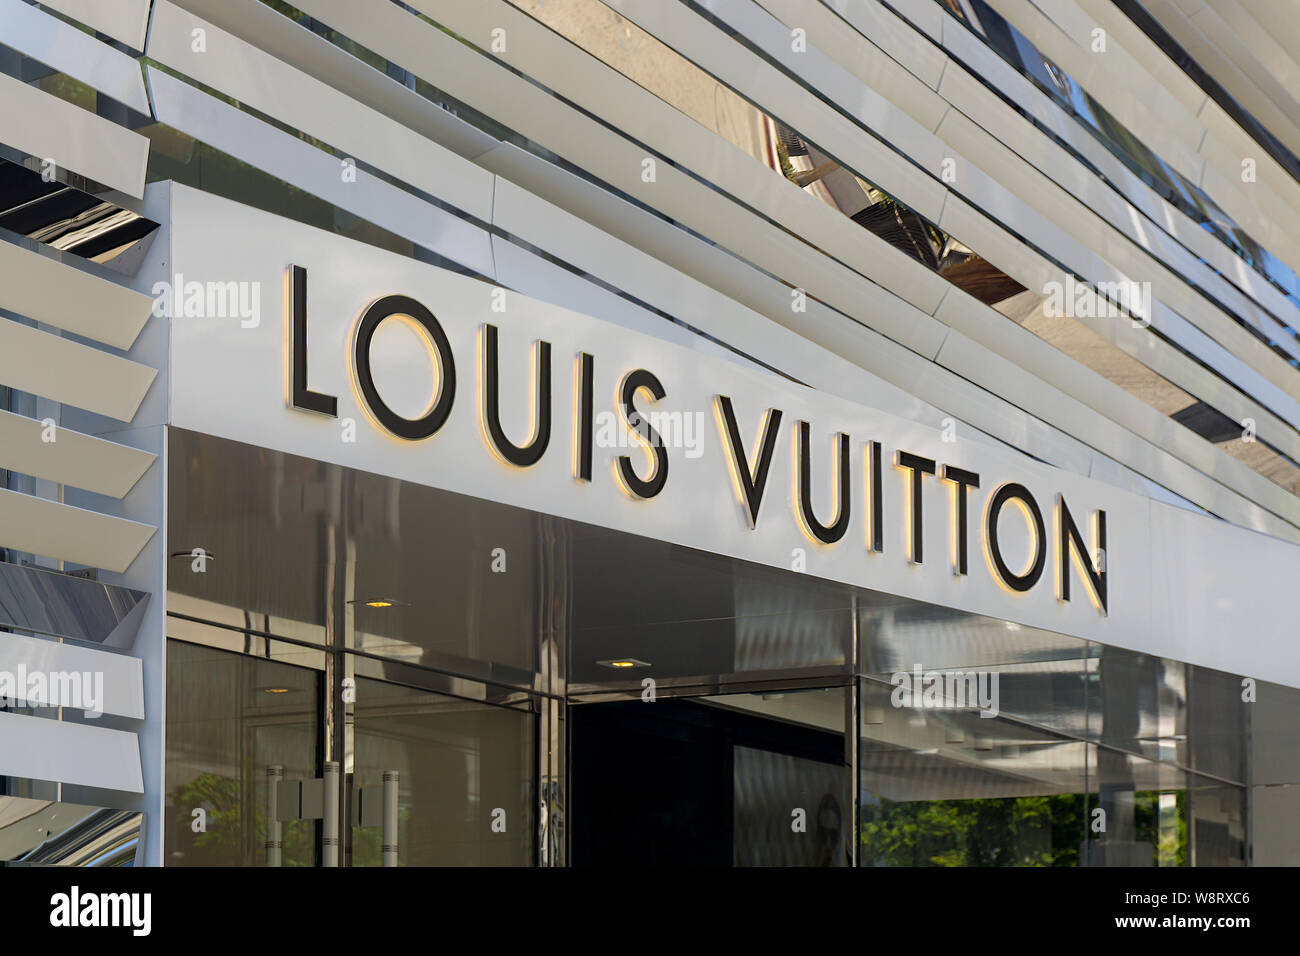 Louis Vuitton New Orleans store, United States